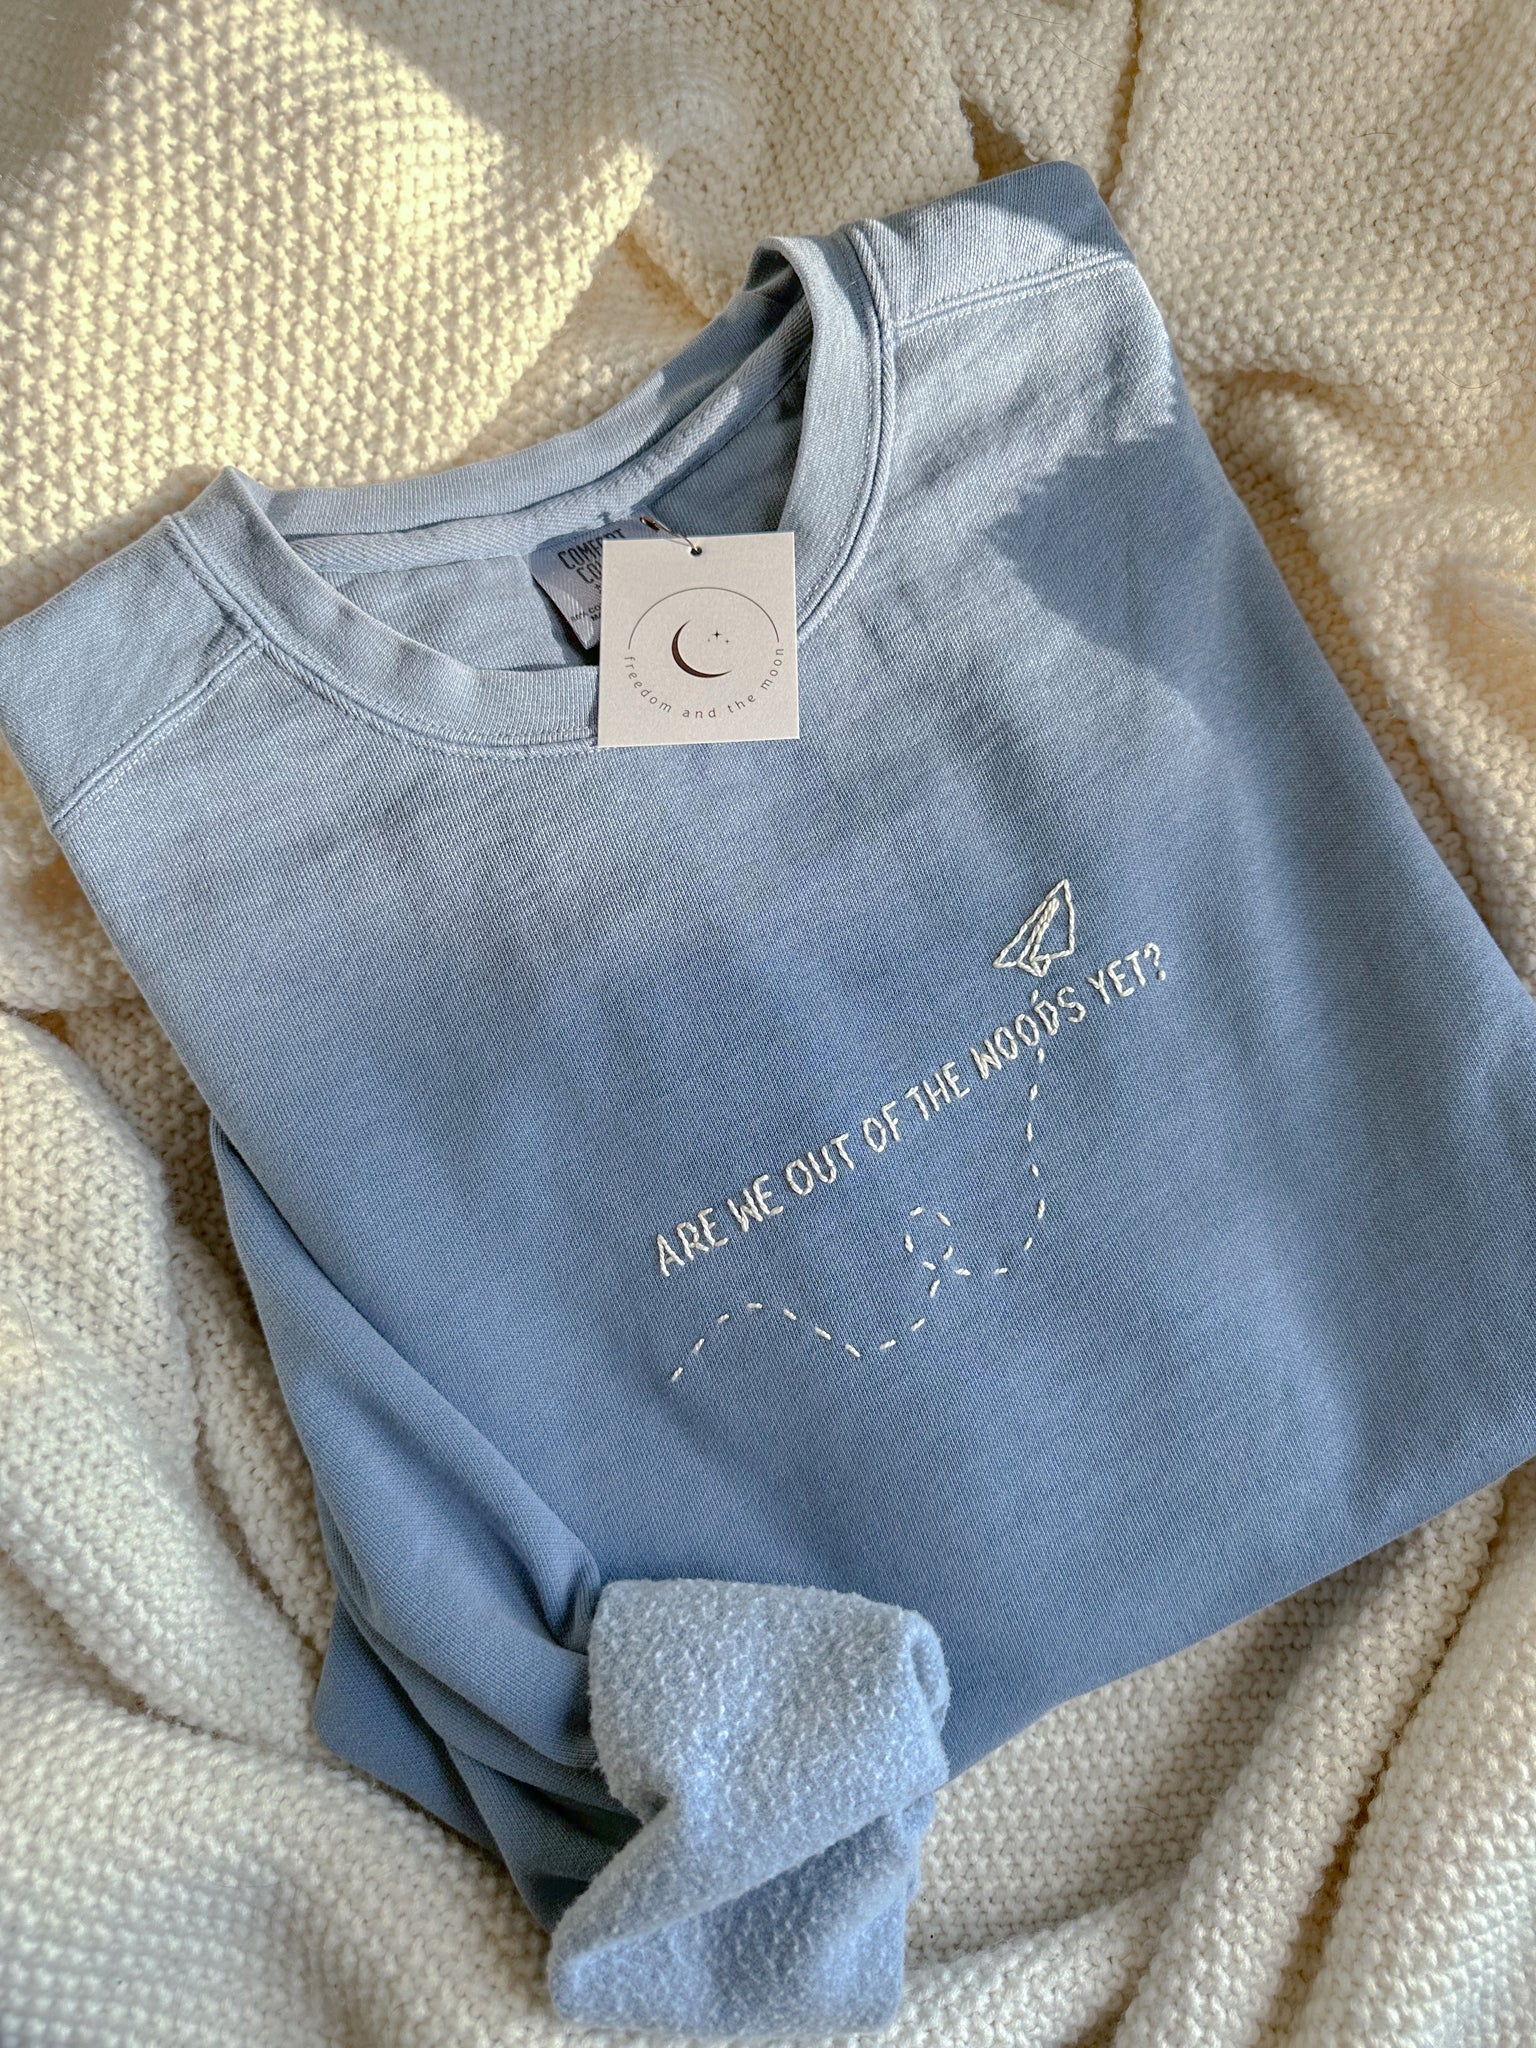 Hand Stitched Out of the Woods Sweatshirt